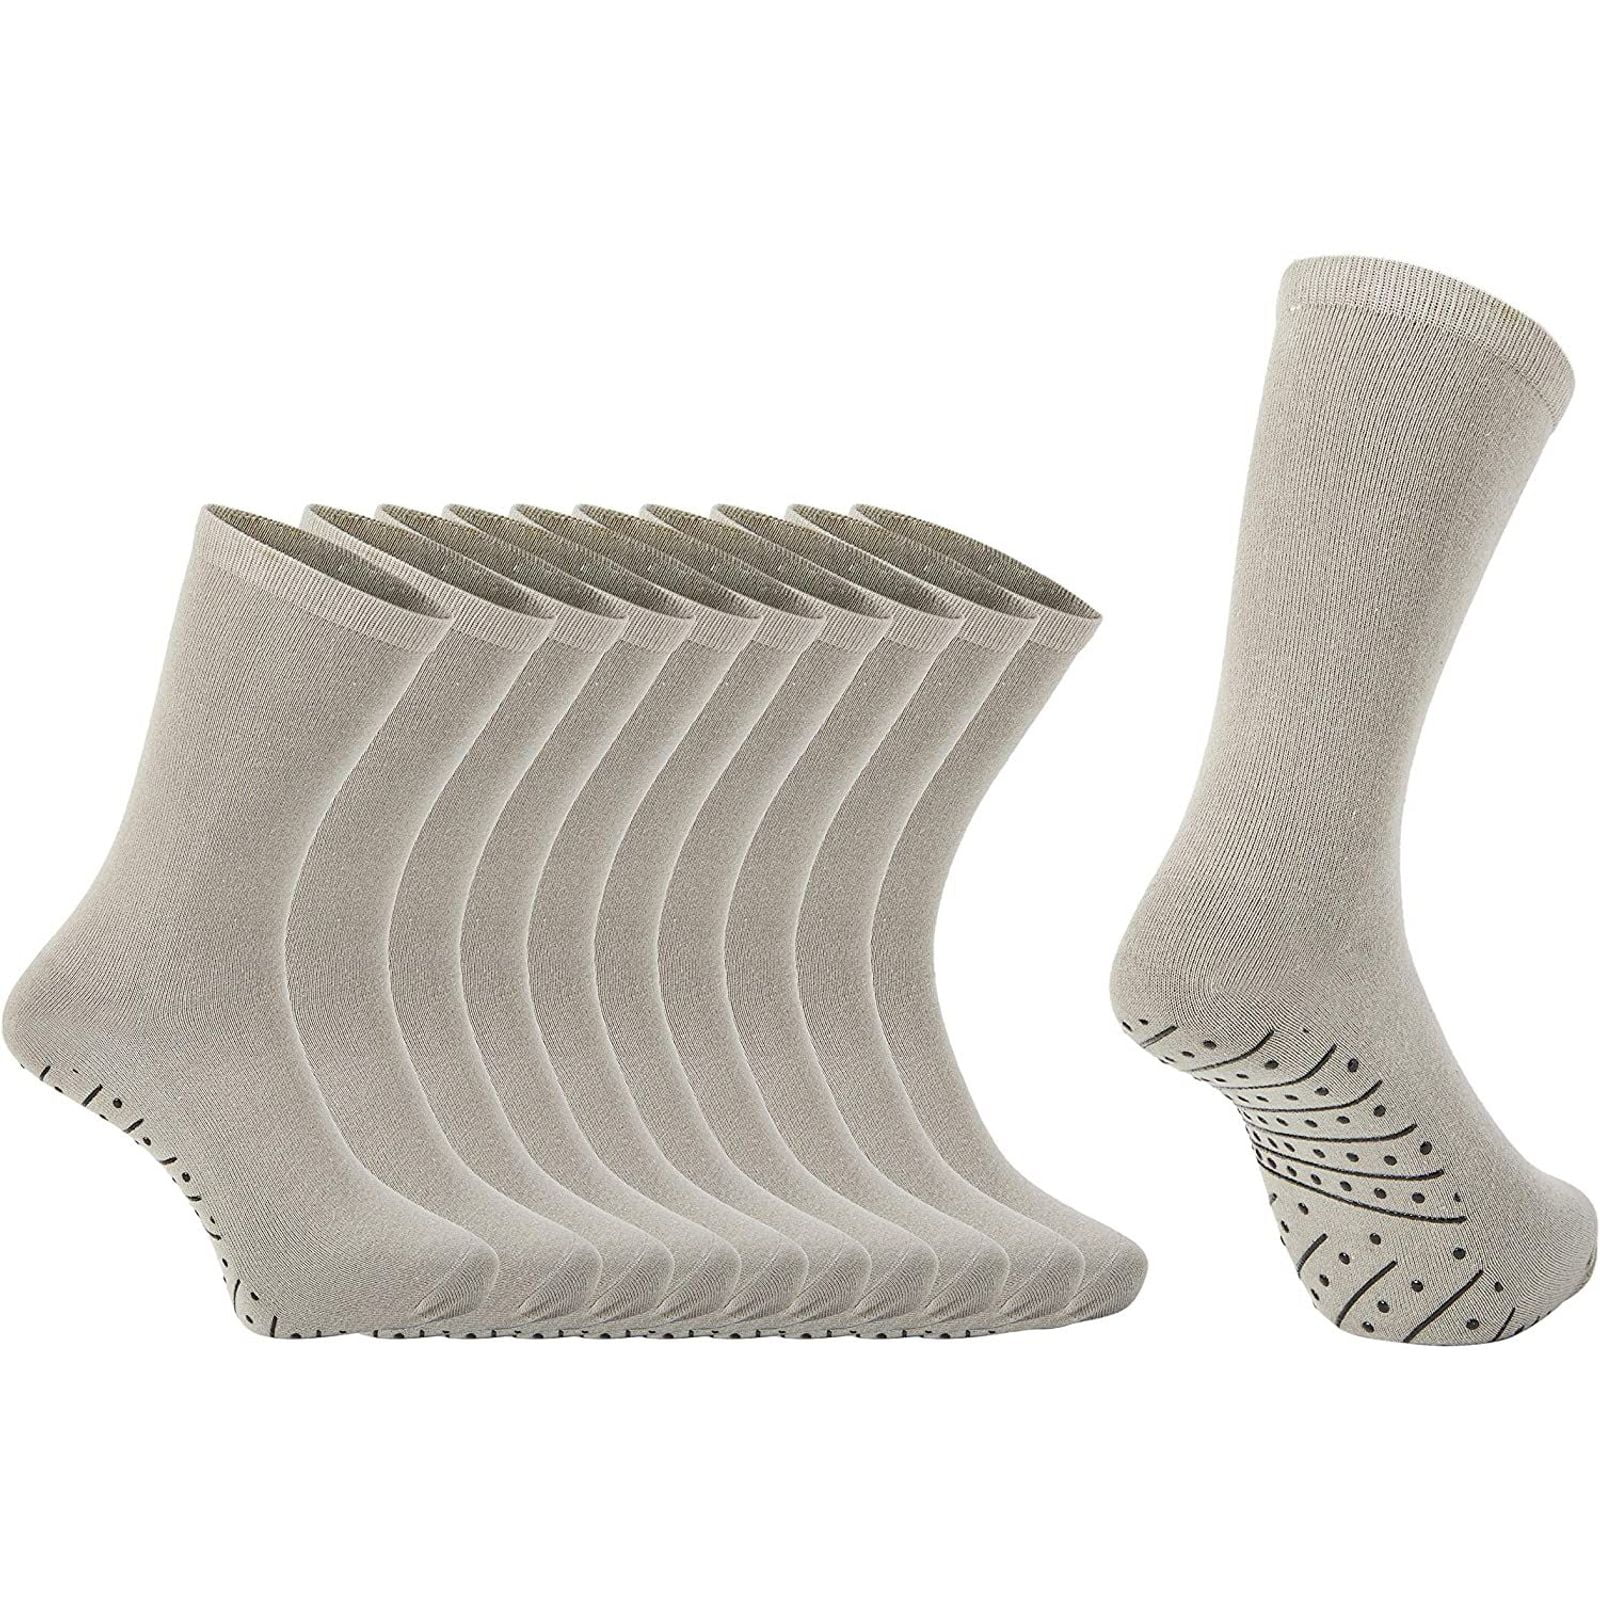 Adult Non-Skid Patient Socks, Double-Sided Grip, Gray